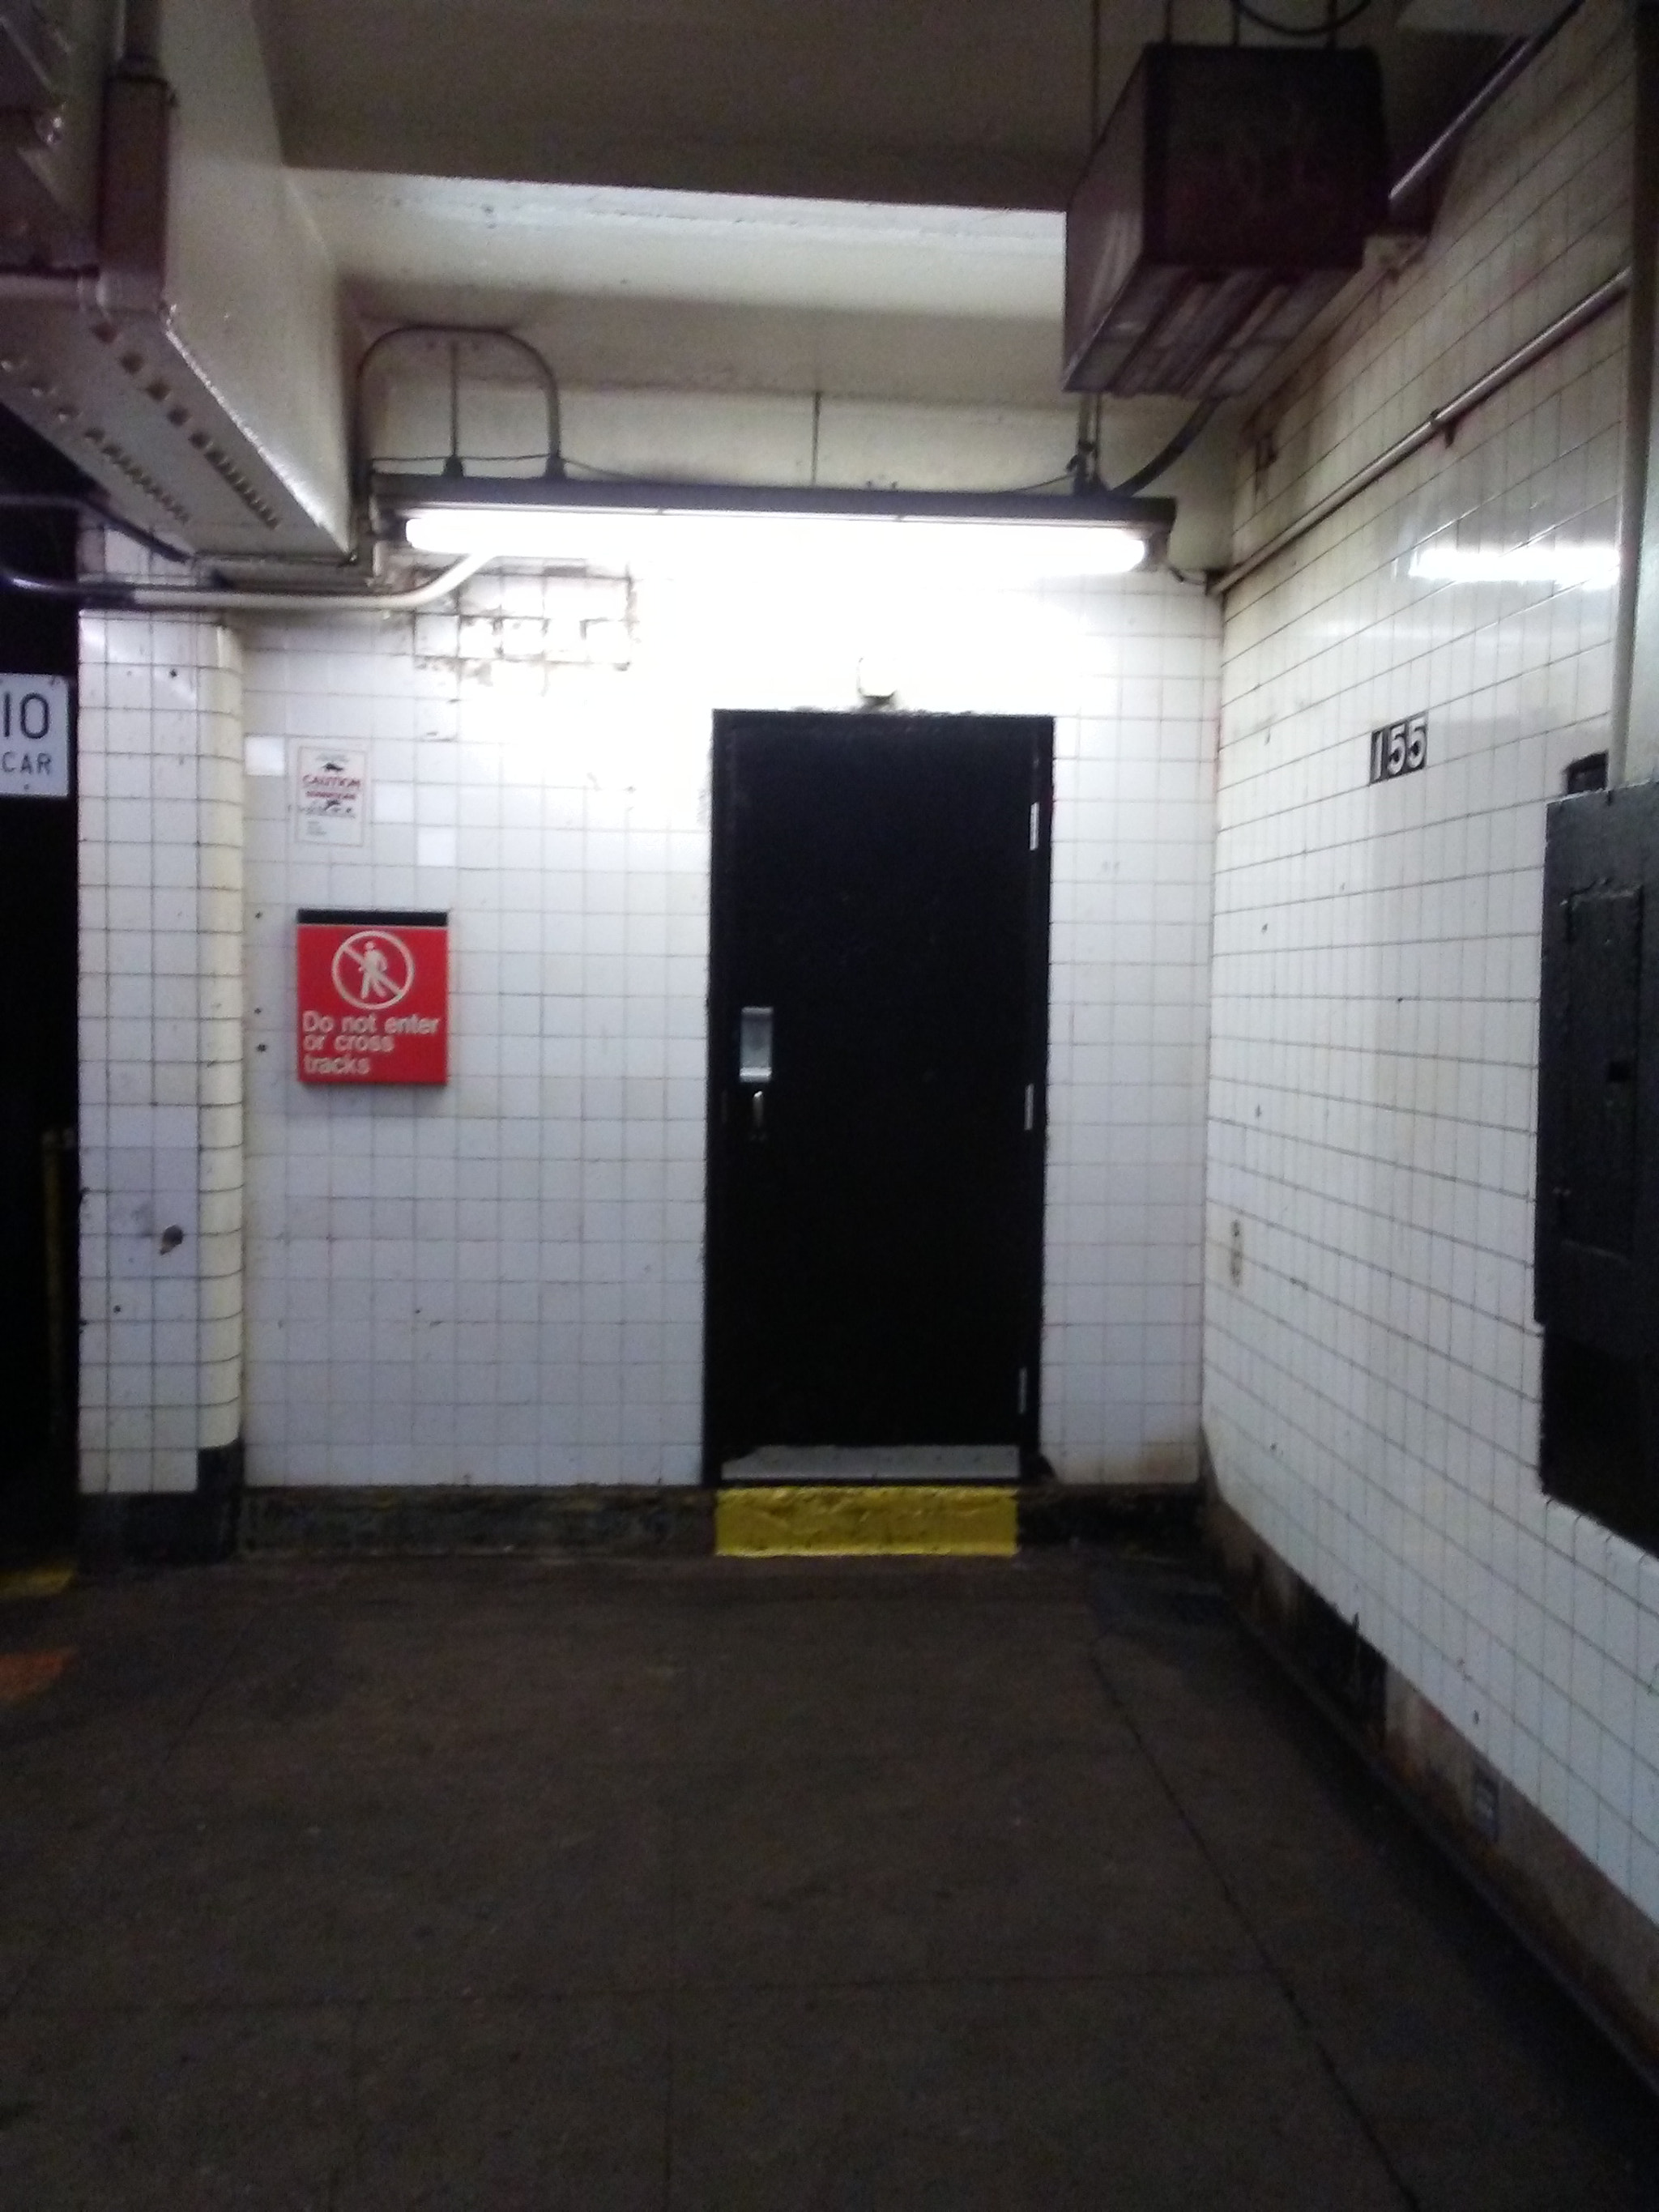 LG M1 sample photo. Ind 155th street station photography